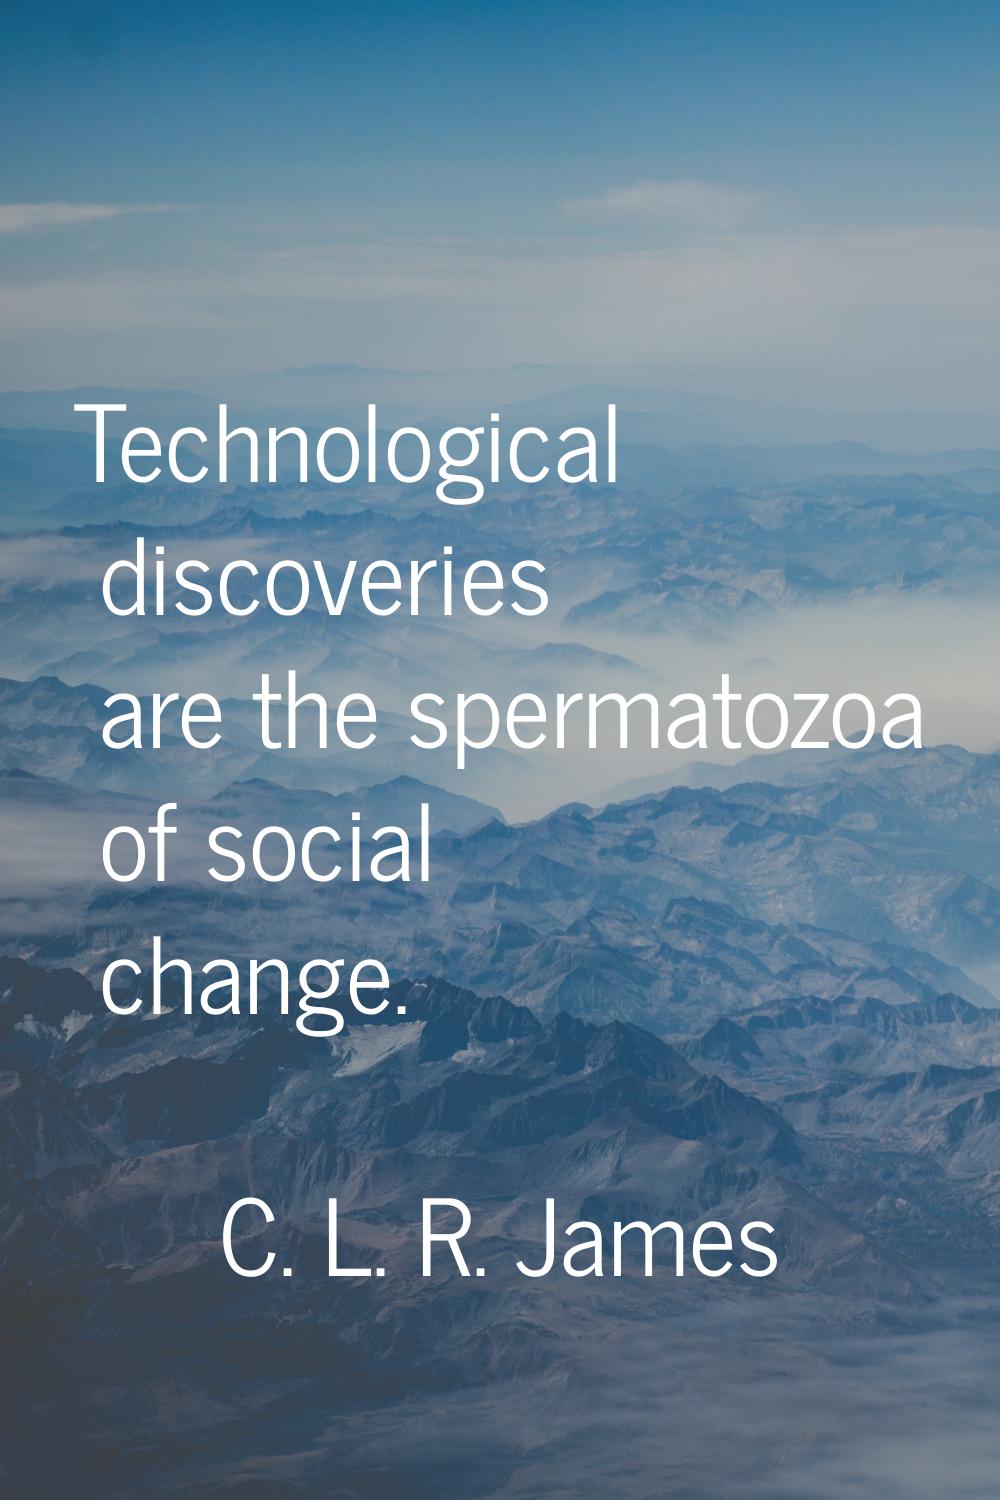 Technological discoveries are the spermatozoa of social change.